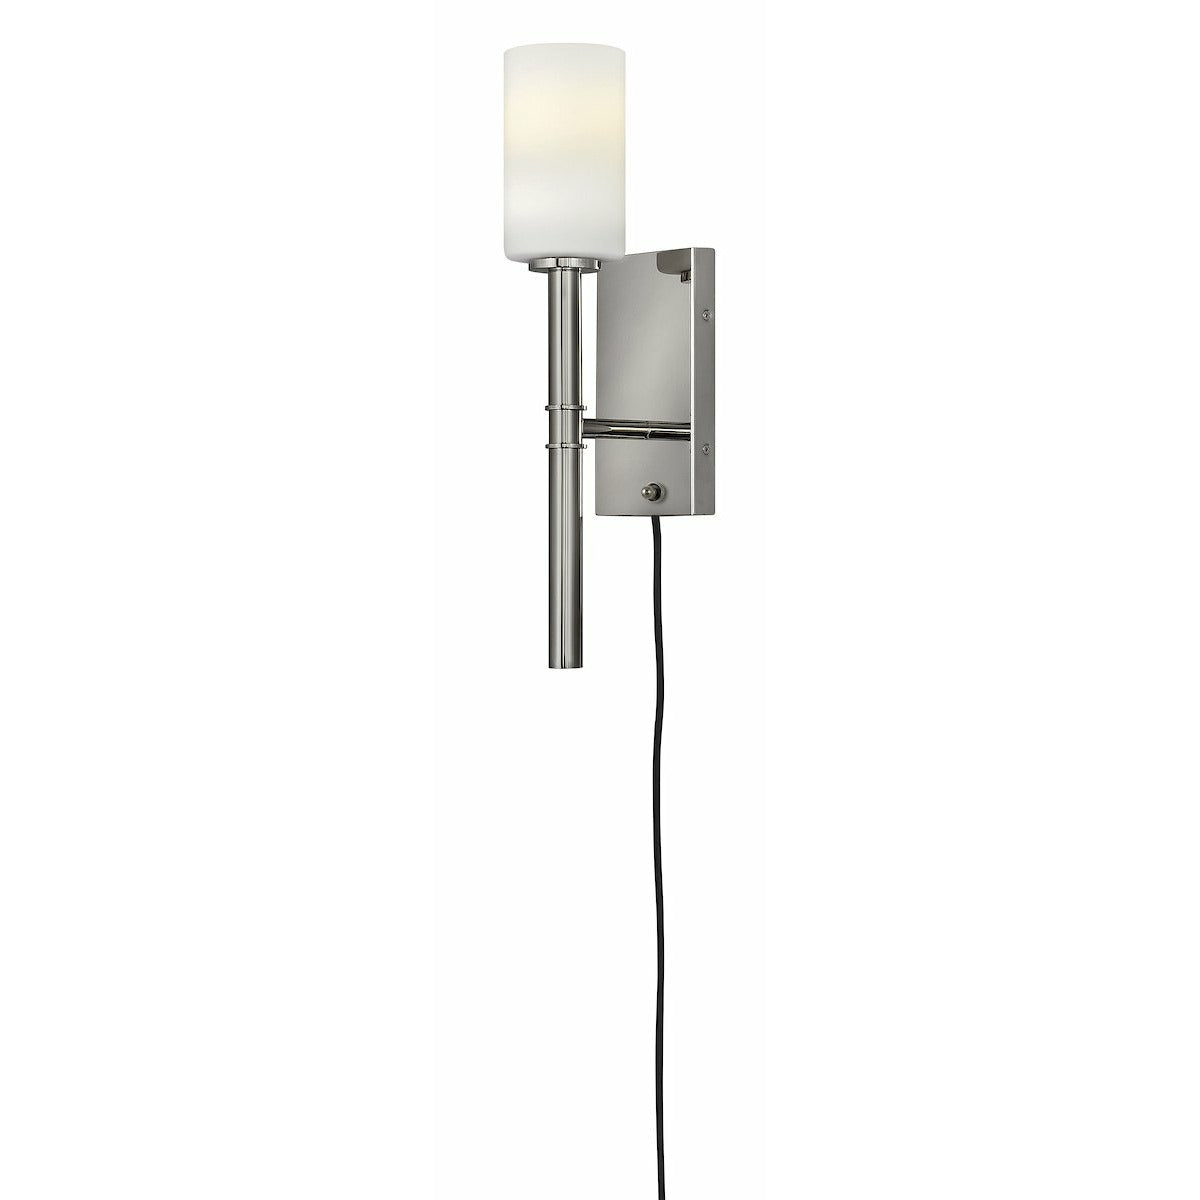 Margeaux Sconce Polished Nickel